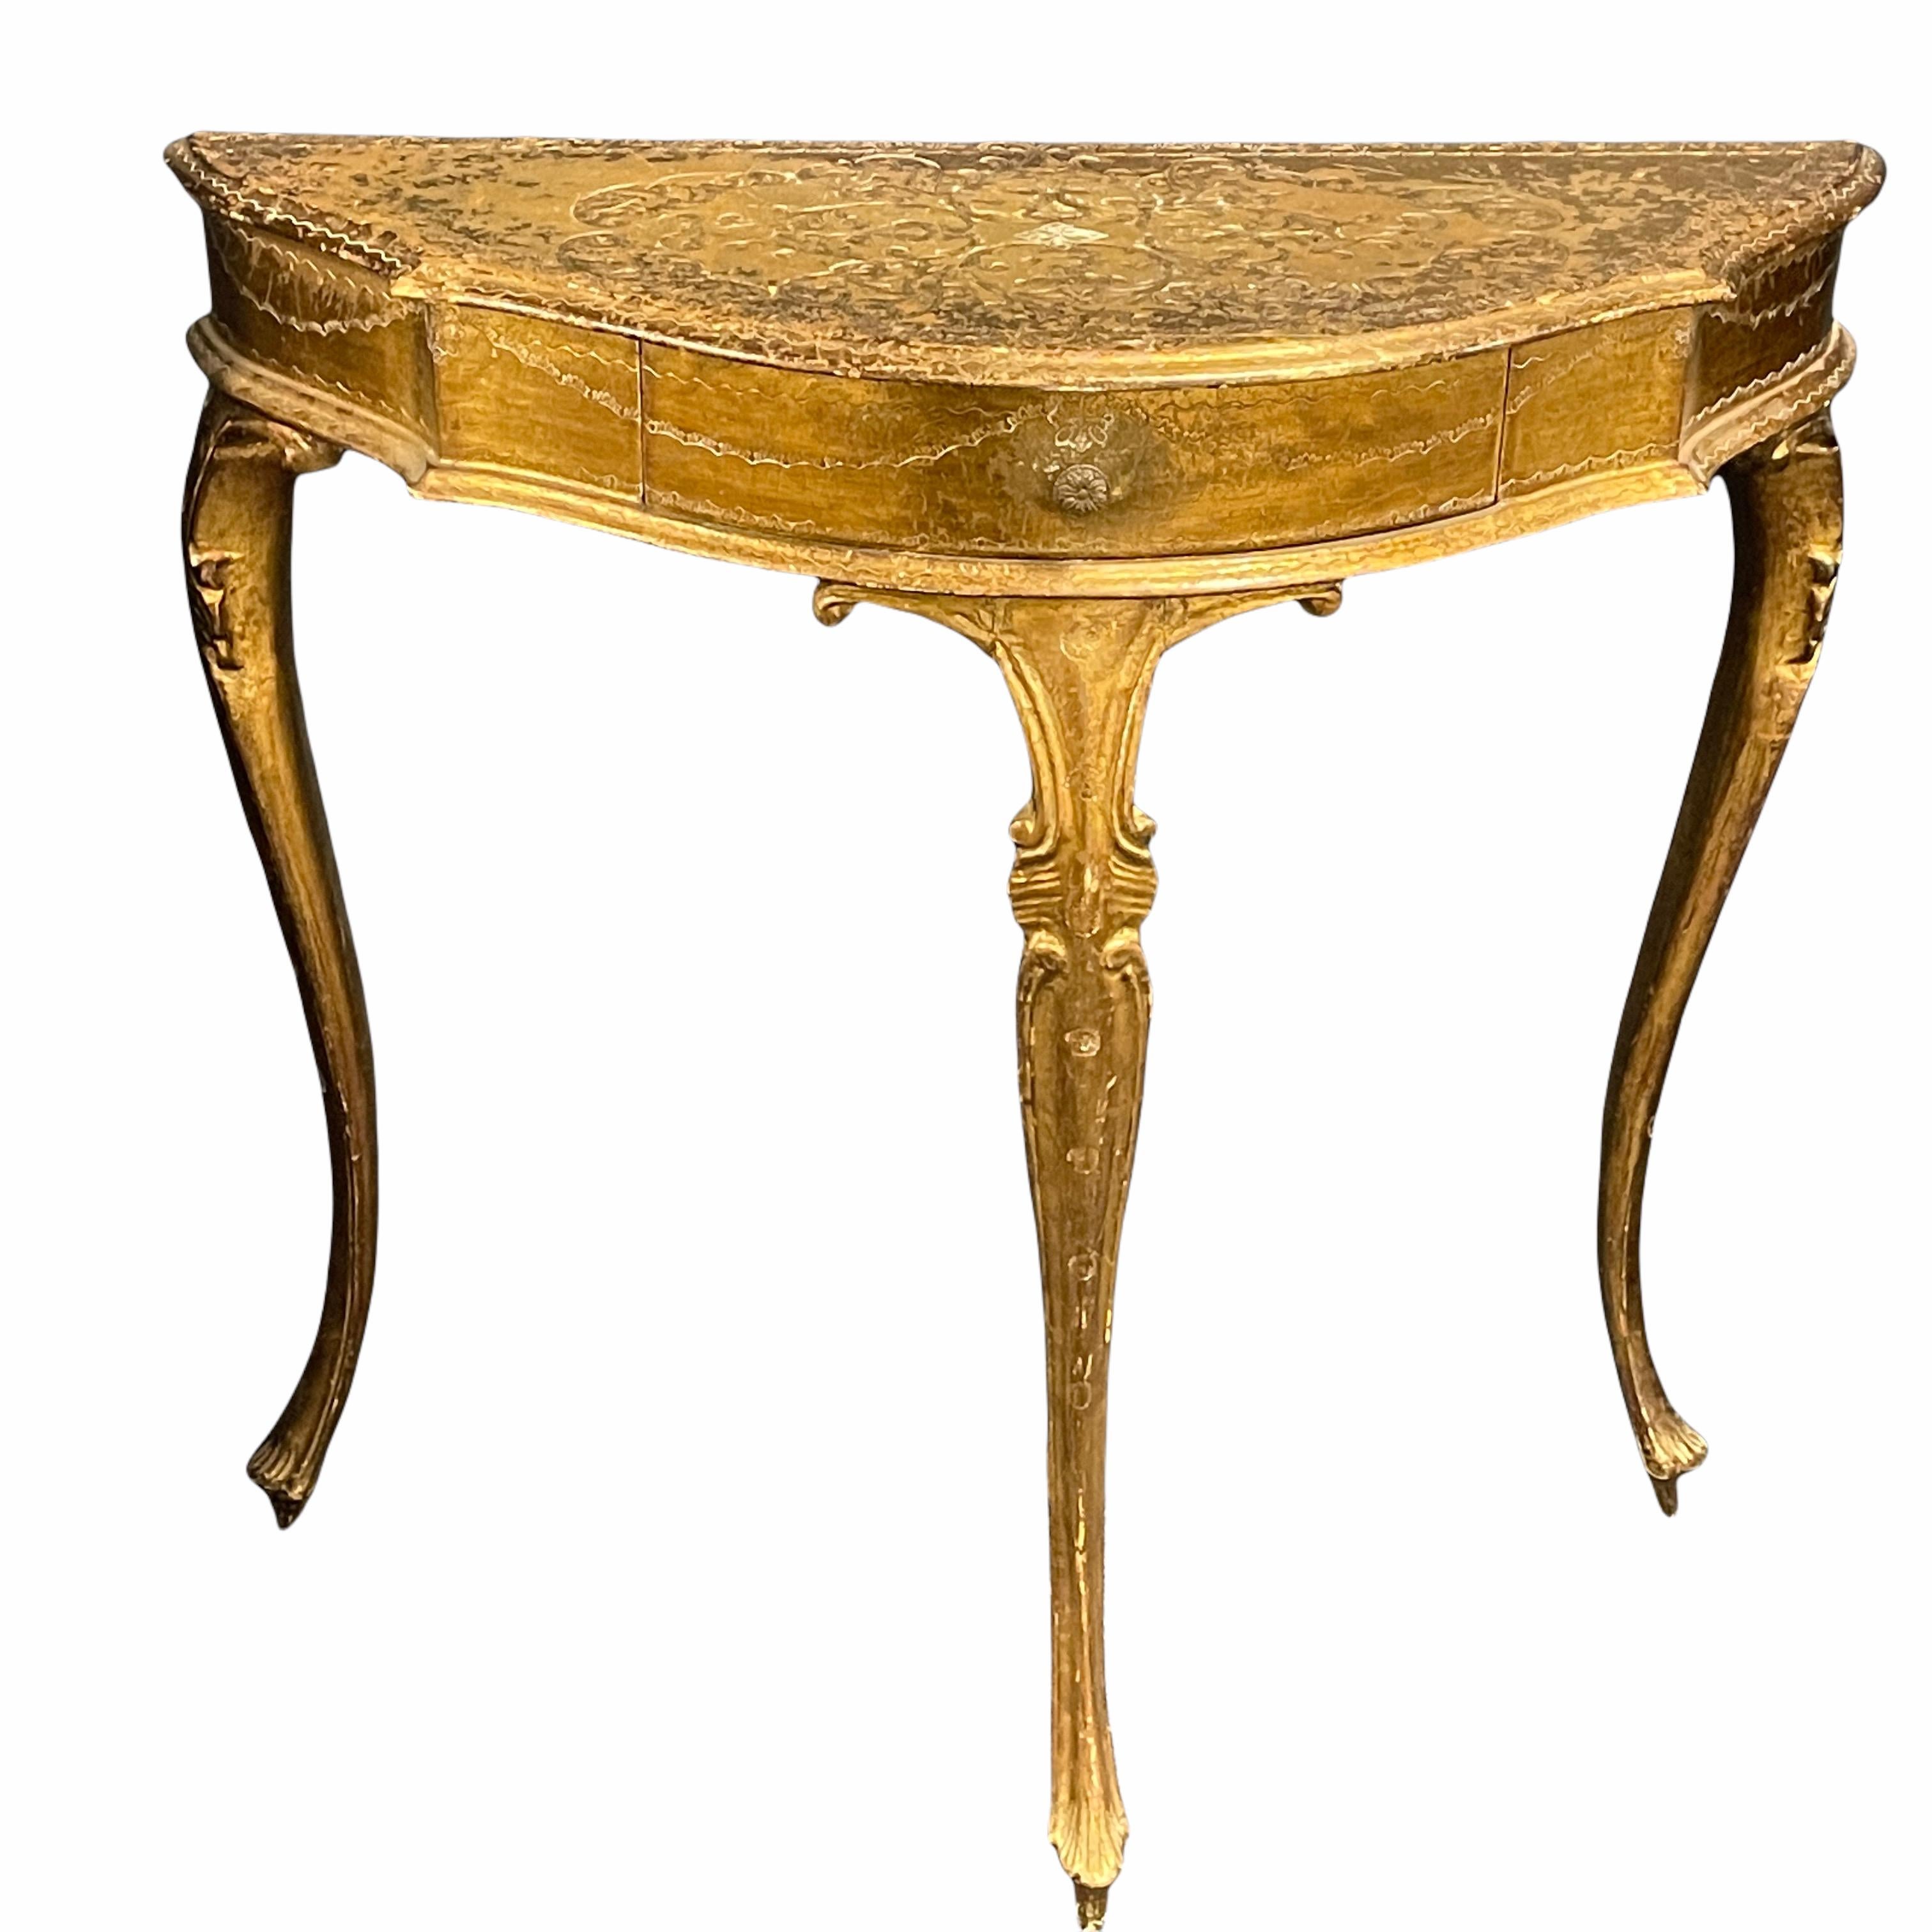 Beautiful Florentine Italian painted table with drawers. Perfect as a bedside table, next to a reading chair or used a small vanity table. It could also be great at the end of a narrow hallway with a mirror or artwork hung above it. The piece is in